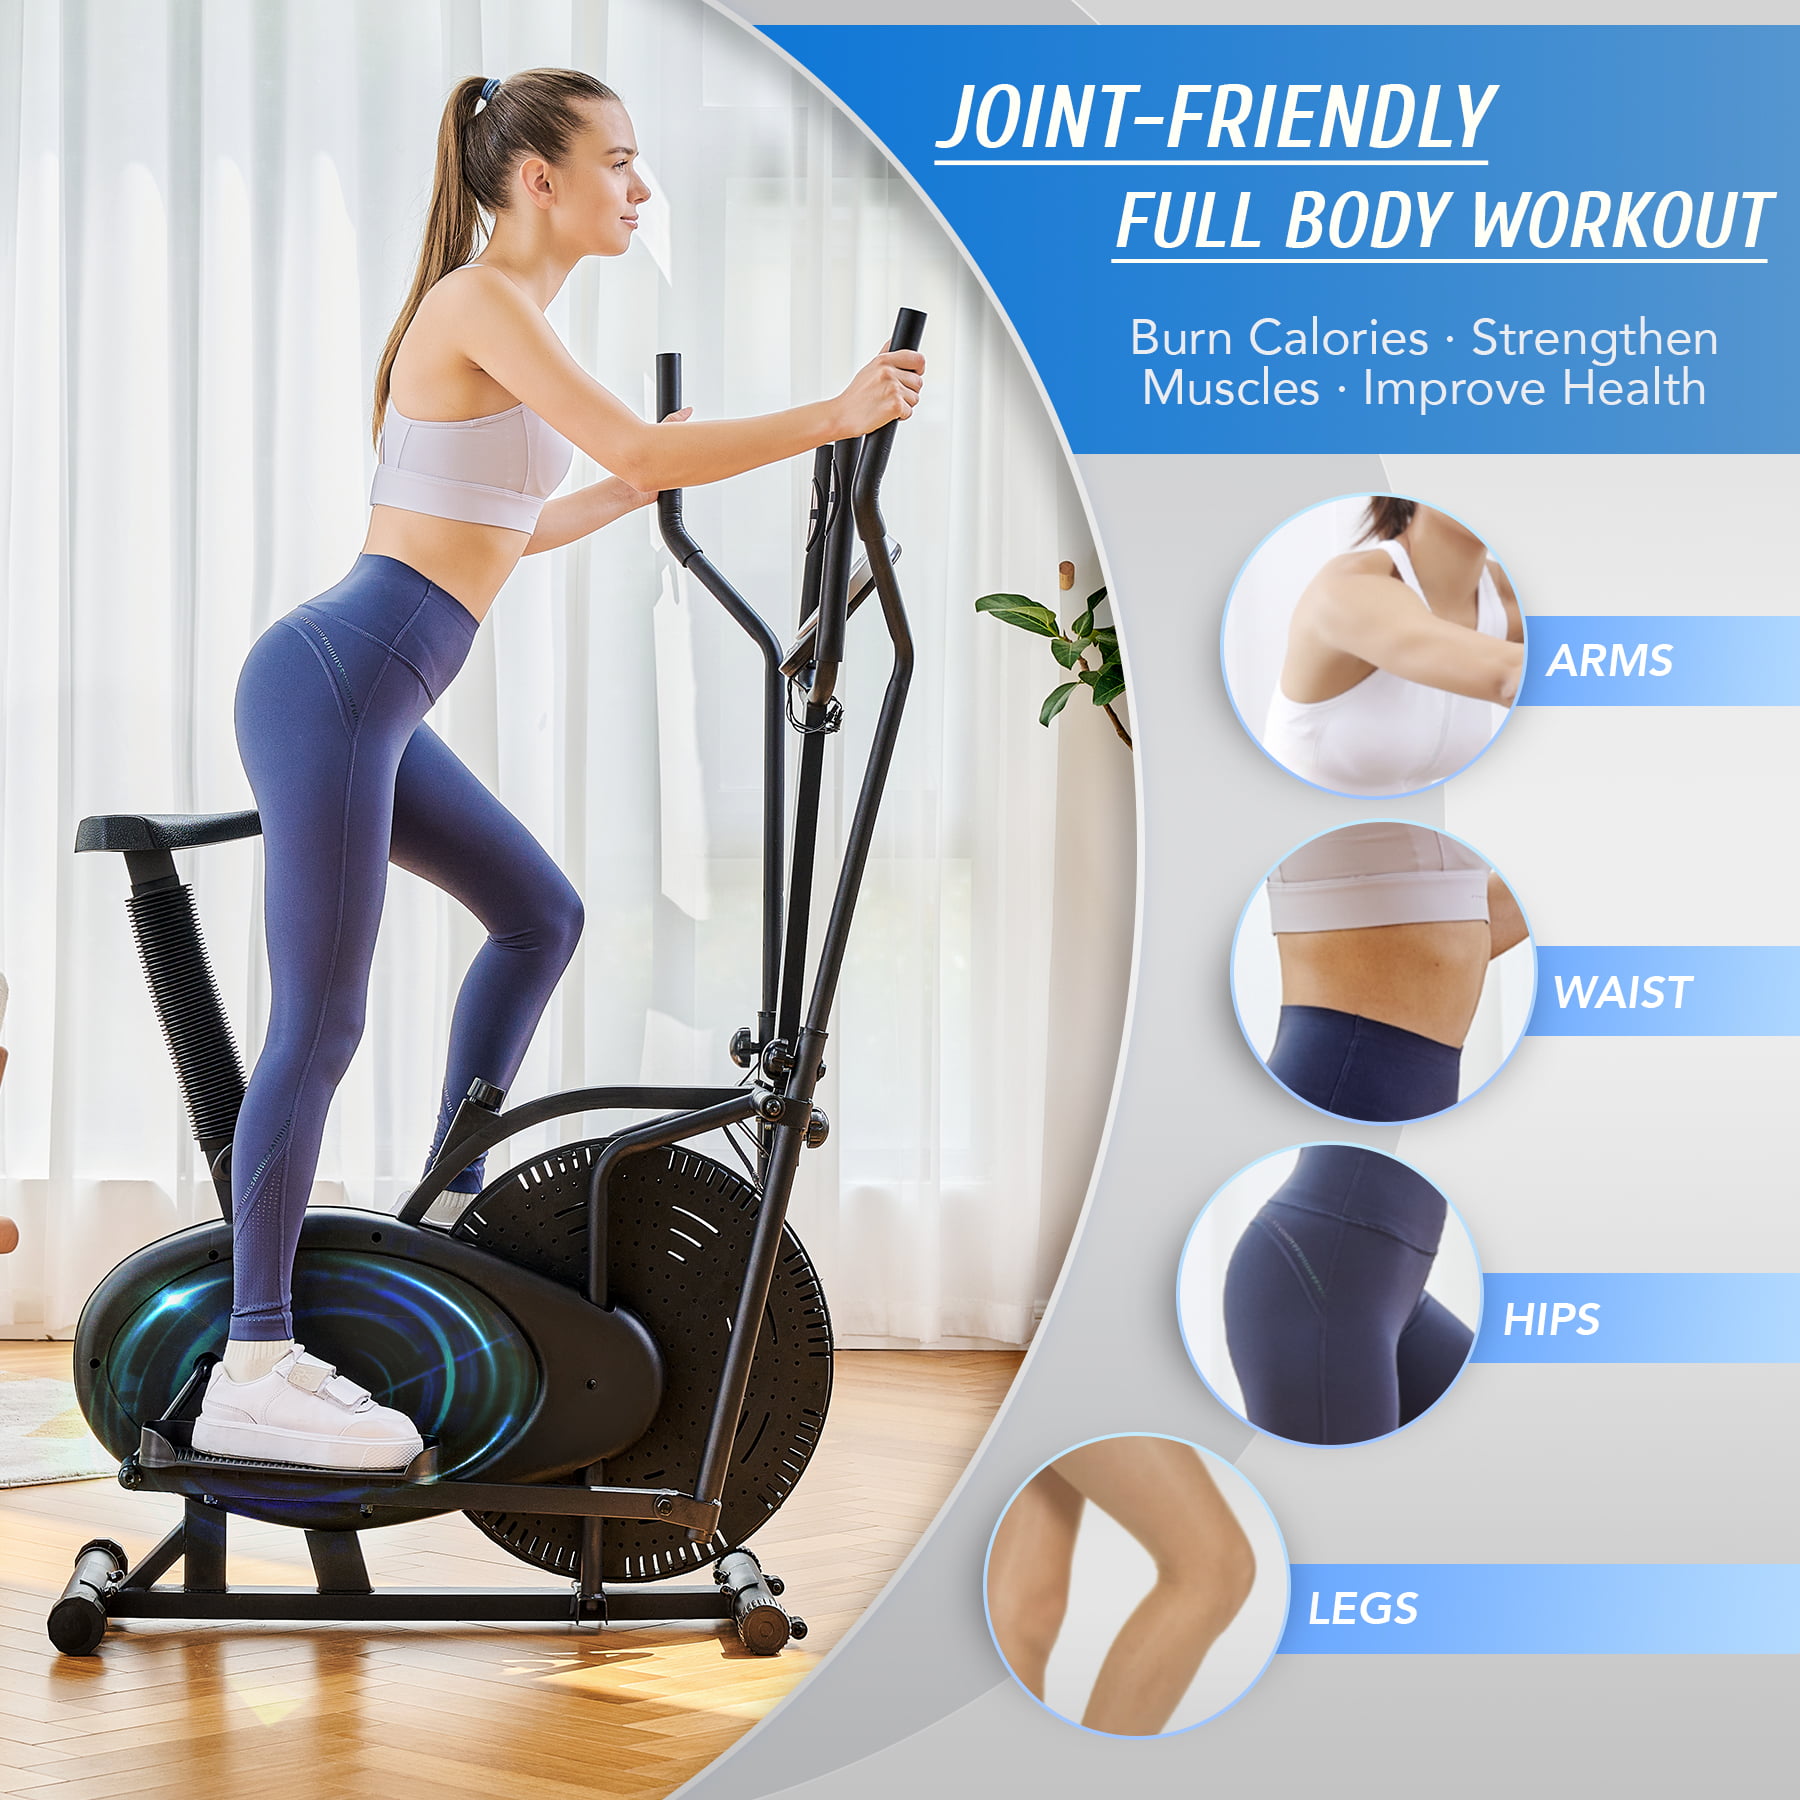 SNODE Magnetic Elliptical Trainer Exercise Machine Heavy Duty Cross Crank Driven and Programmable Monitor for Home Fitness Cardio Training Workout 